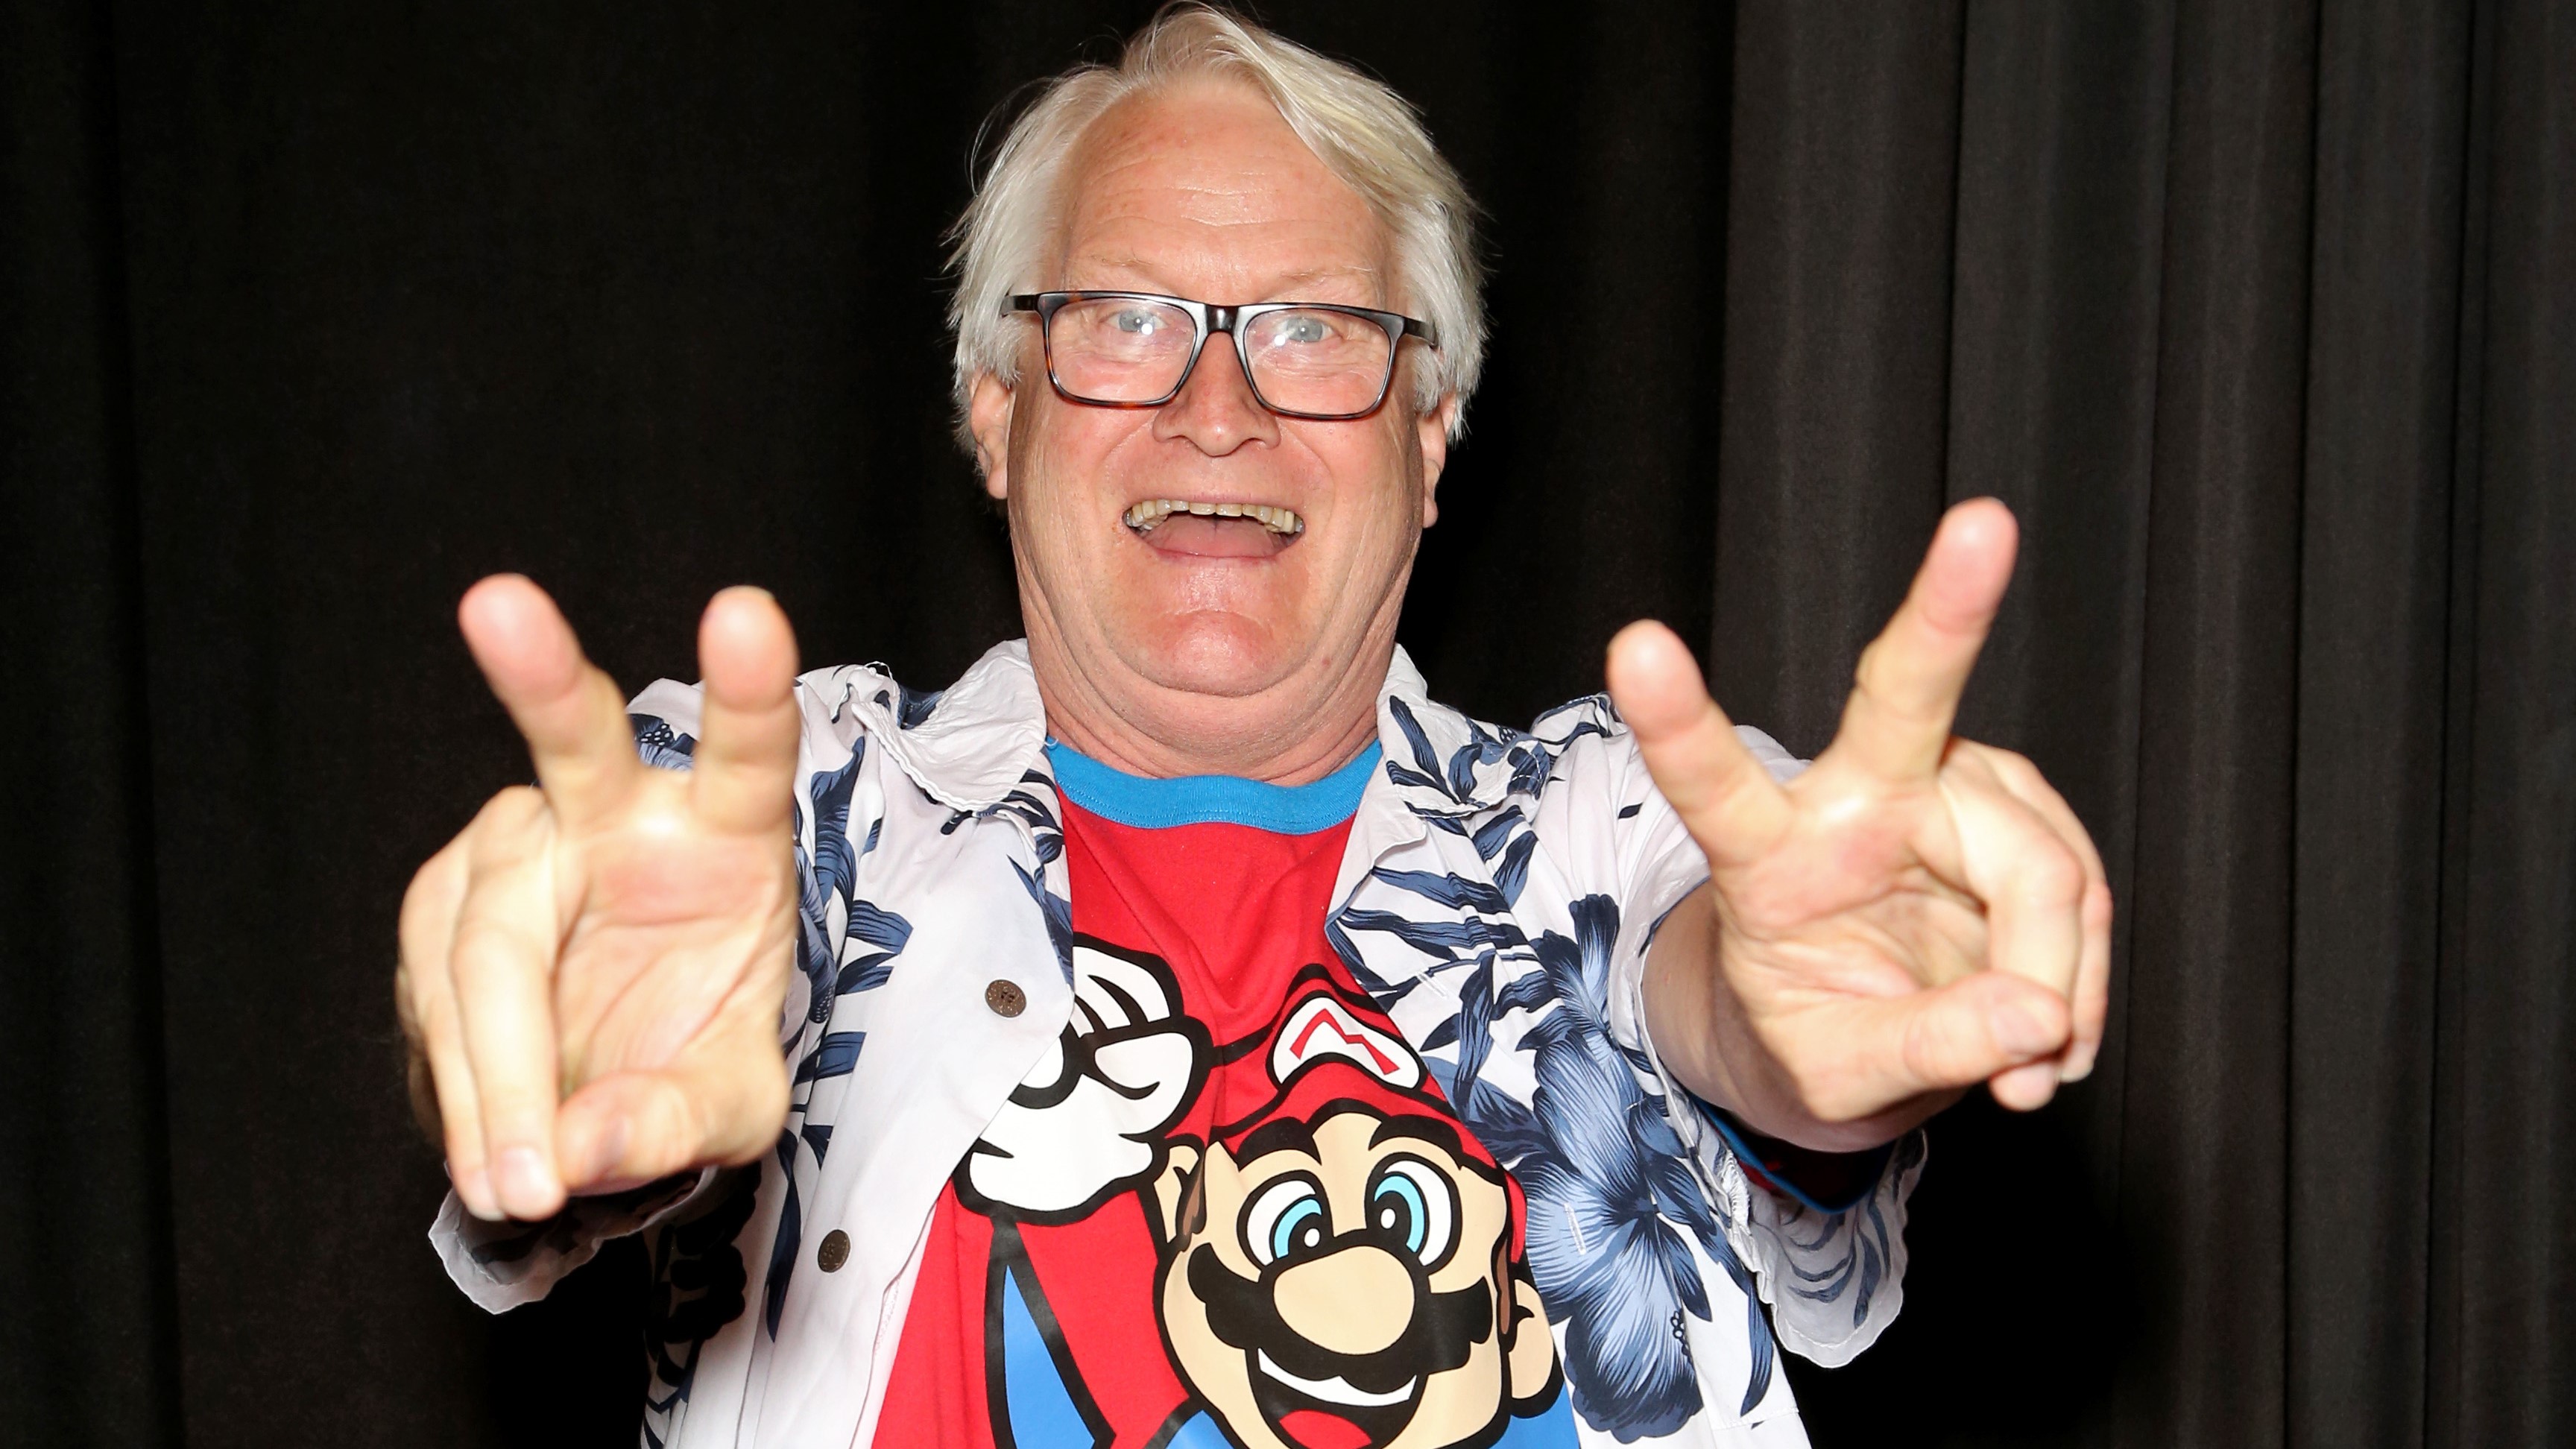  It's-a not me: Voice actor of Mario retires after 27 years 